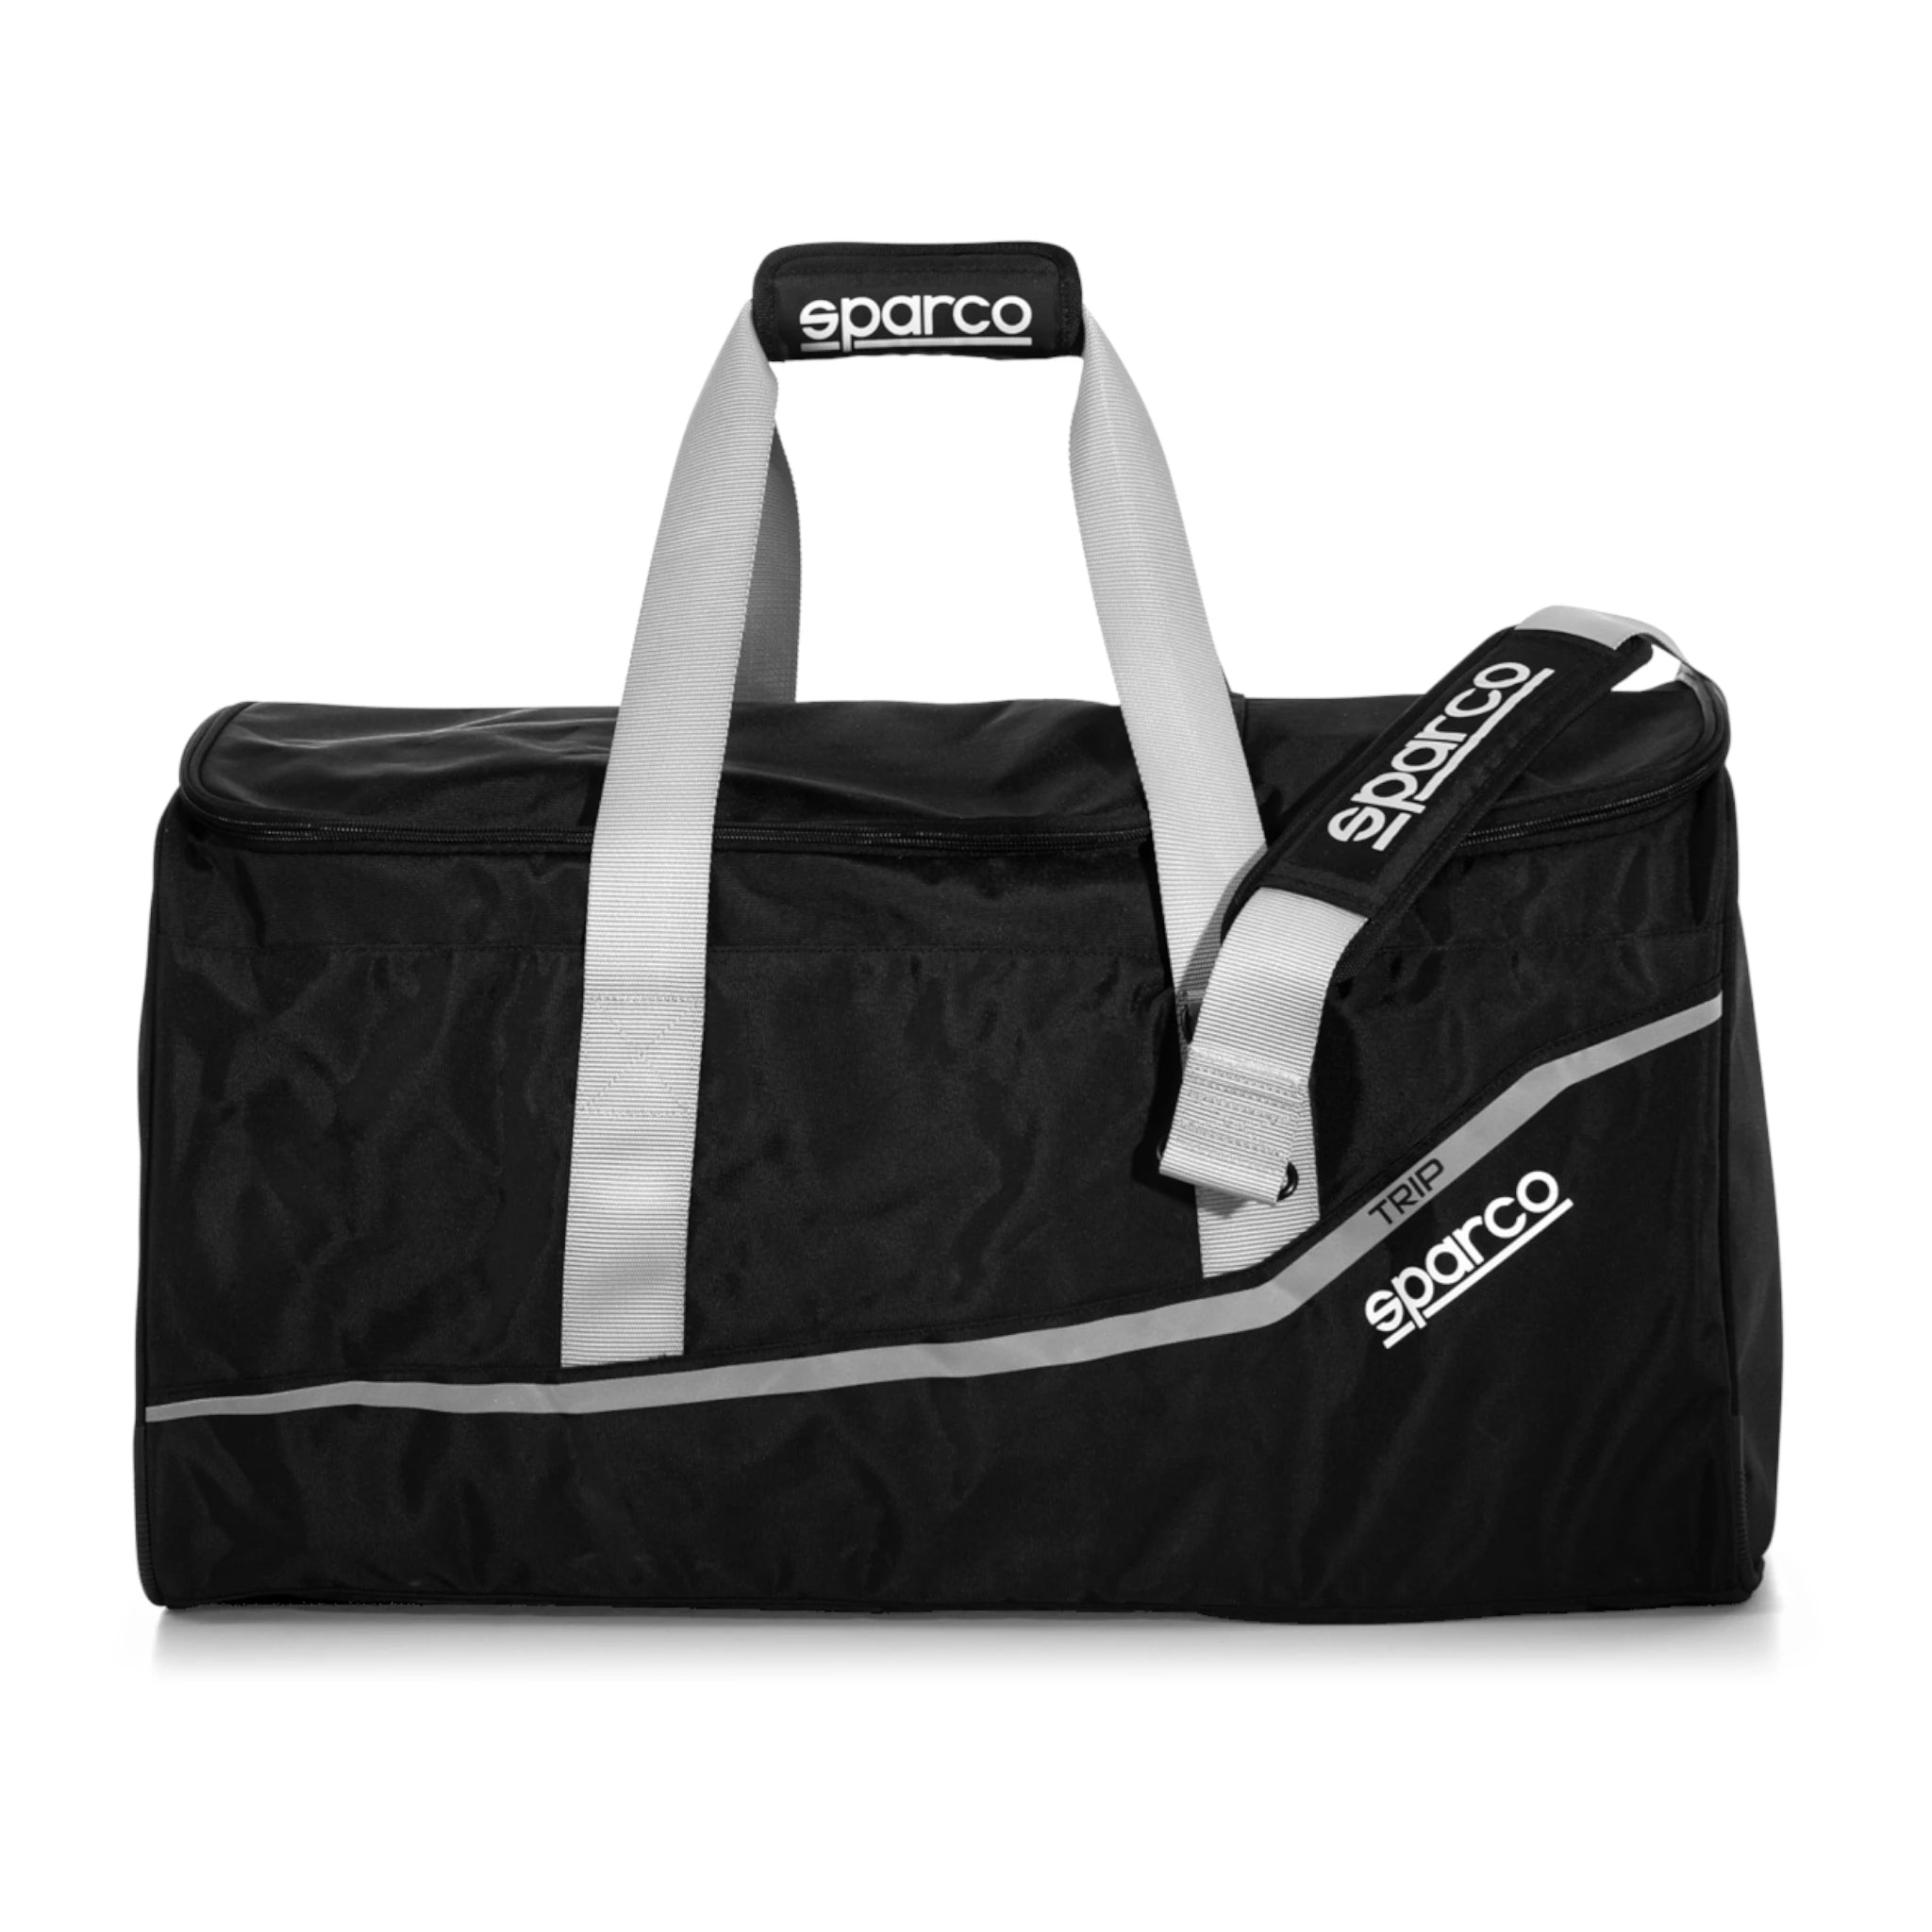 Sparco Trip Gearbag